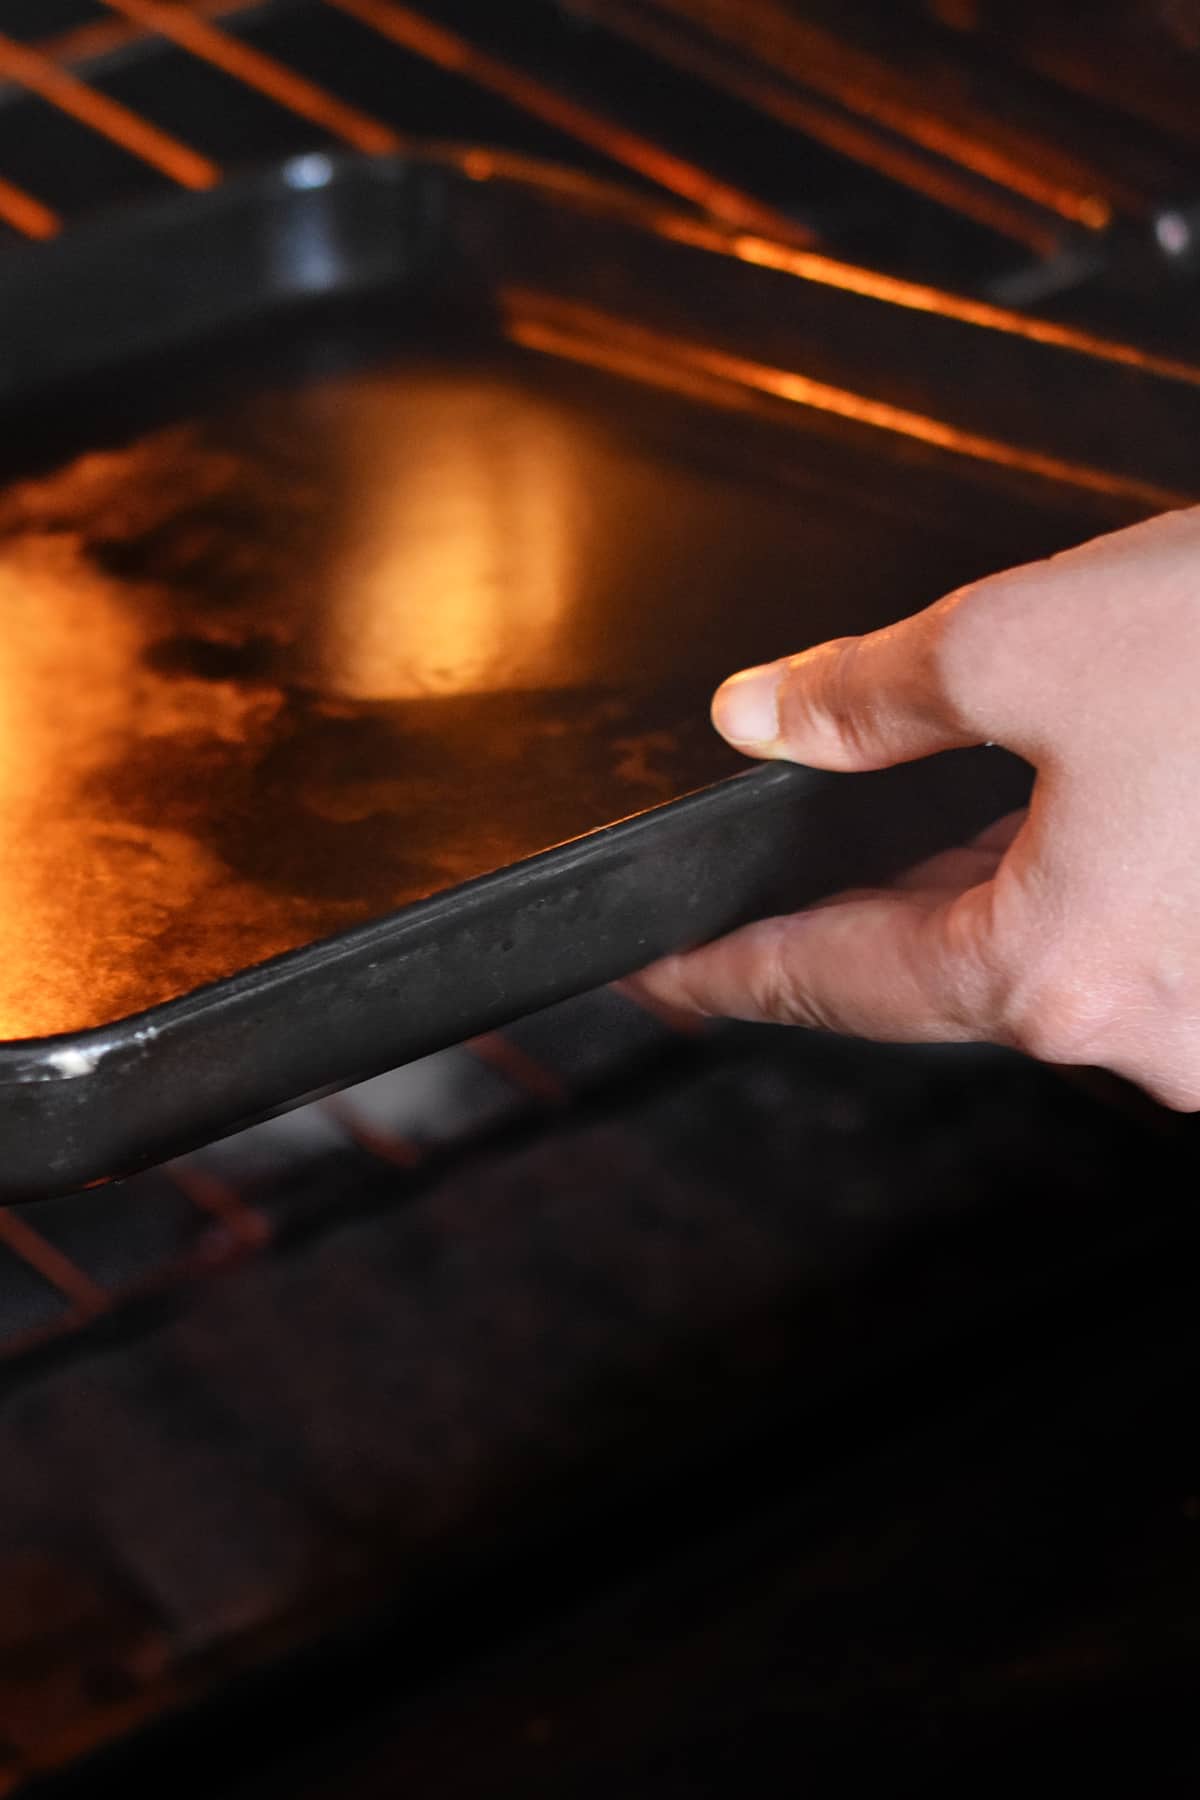 A hand is placing a black rimmed baking sheet into an open oven.